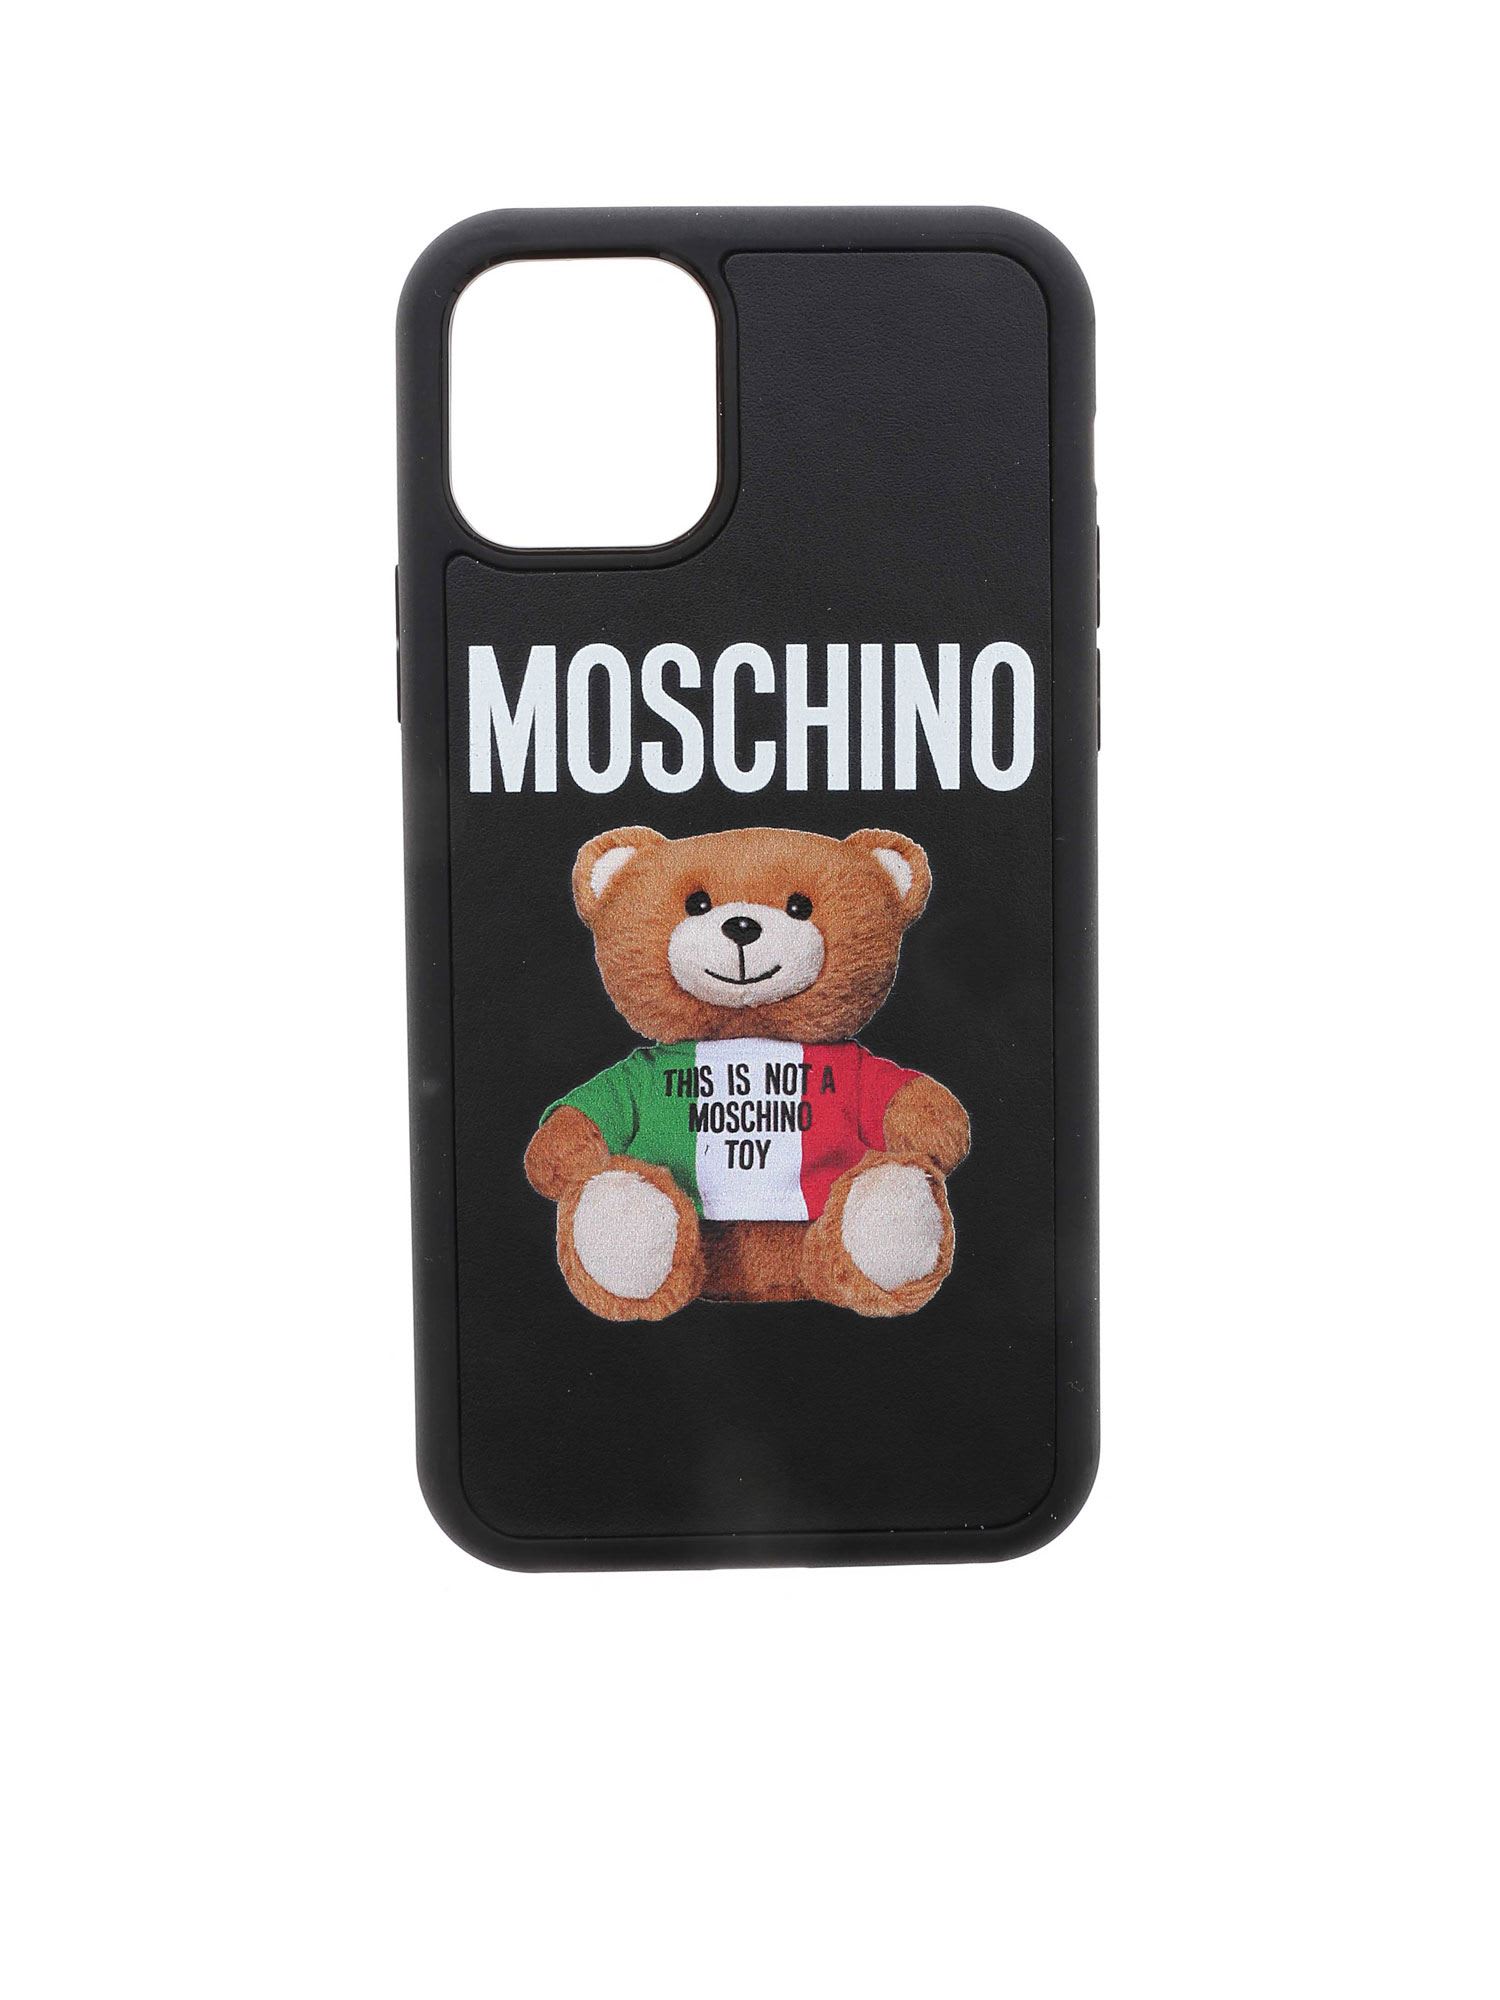 Moschino 11 Pro Iphone Cover In Black